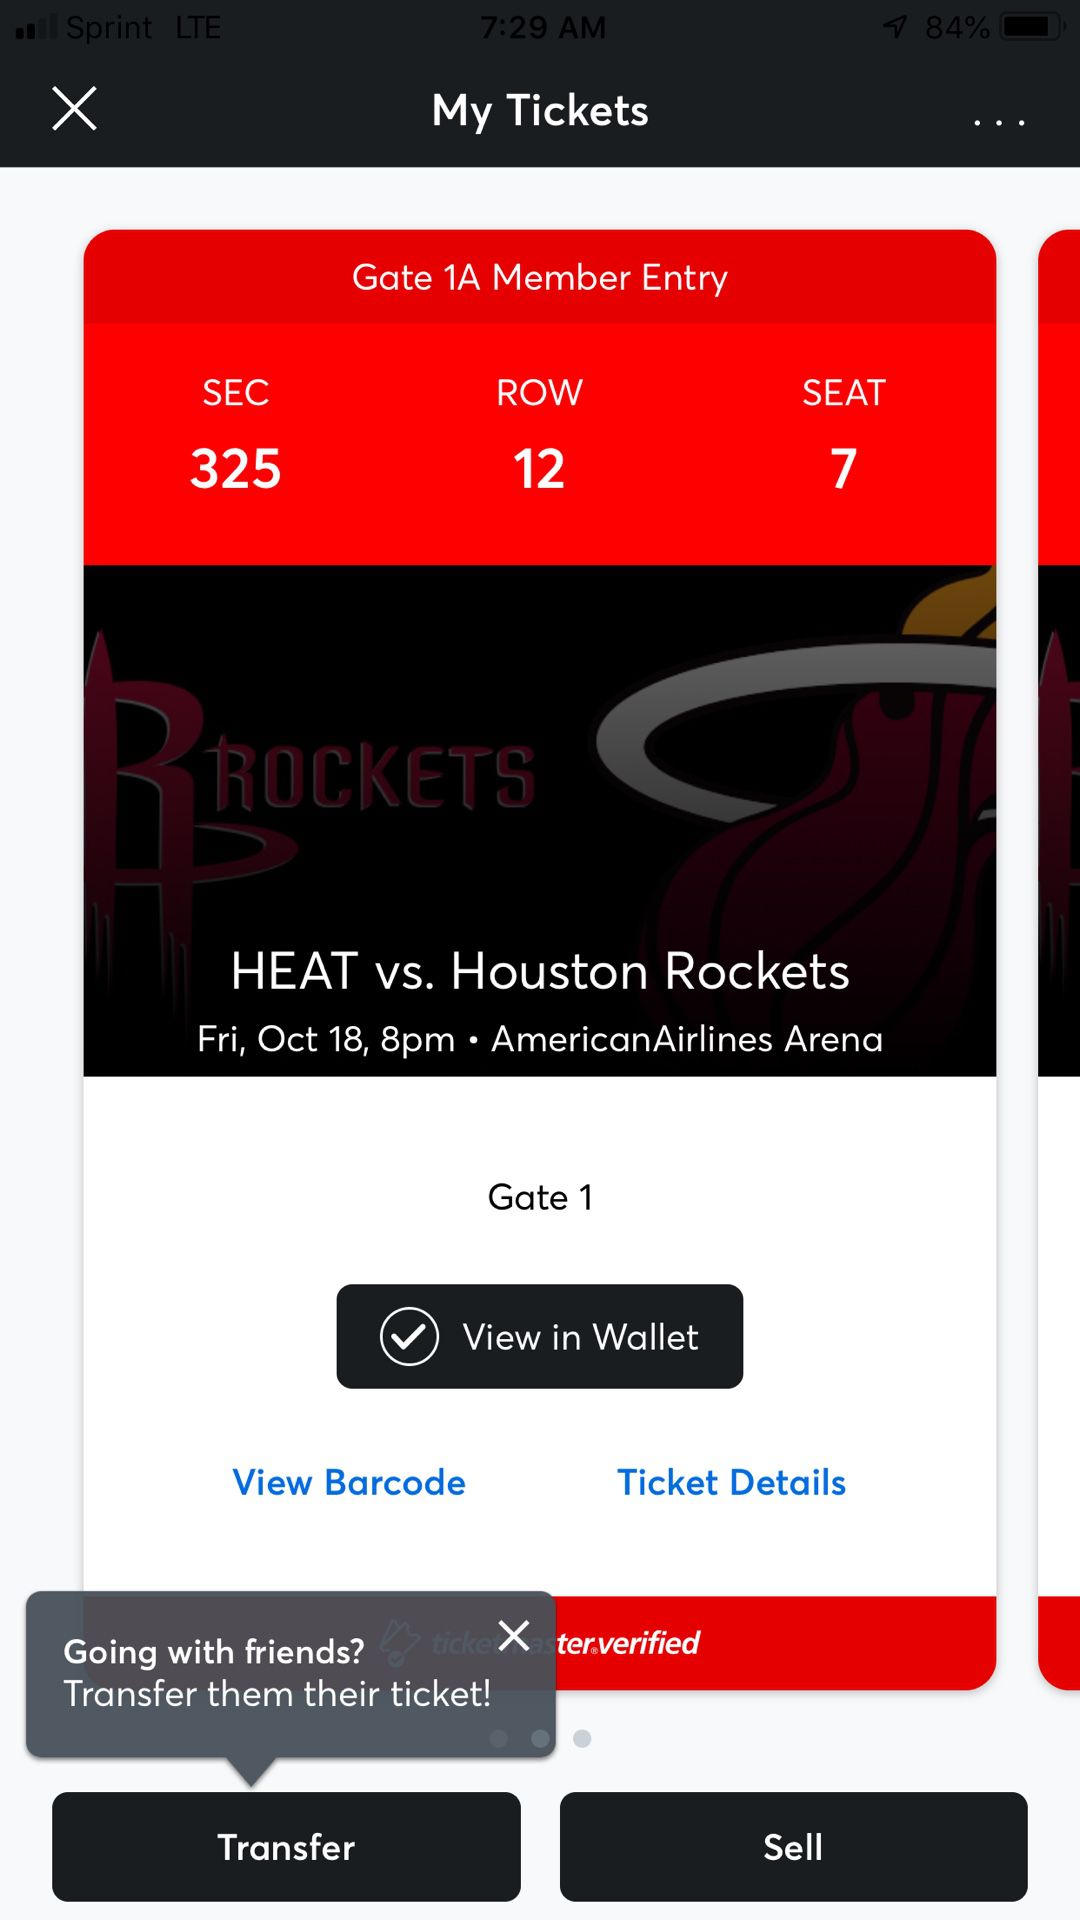 Miami heat Vs Houston Rockets 1 ticket Section 325 Row 12 Center Court (great view)